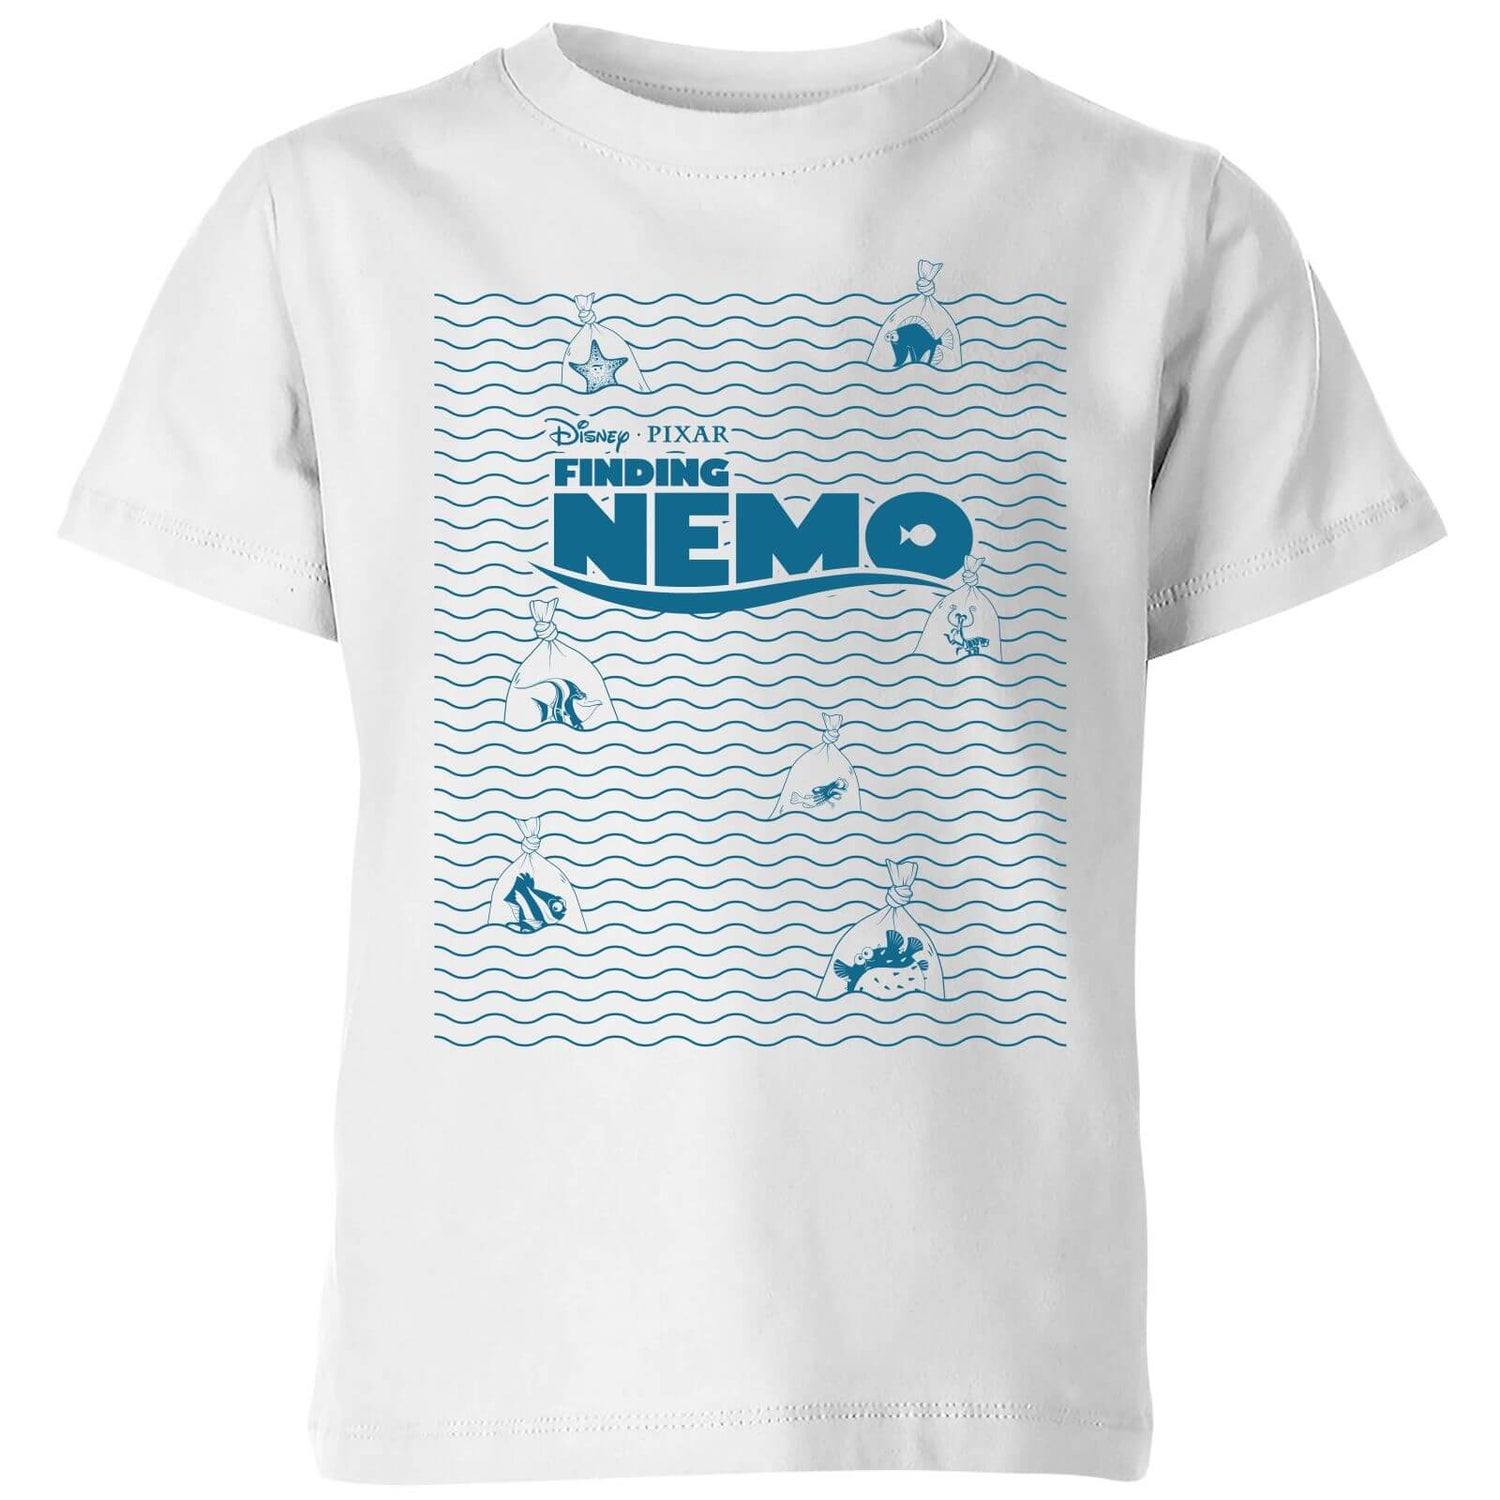 Finding Nemo Now What? Kids' T-Shirt - White